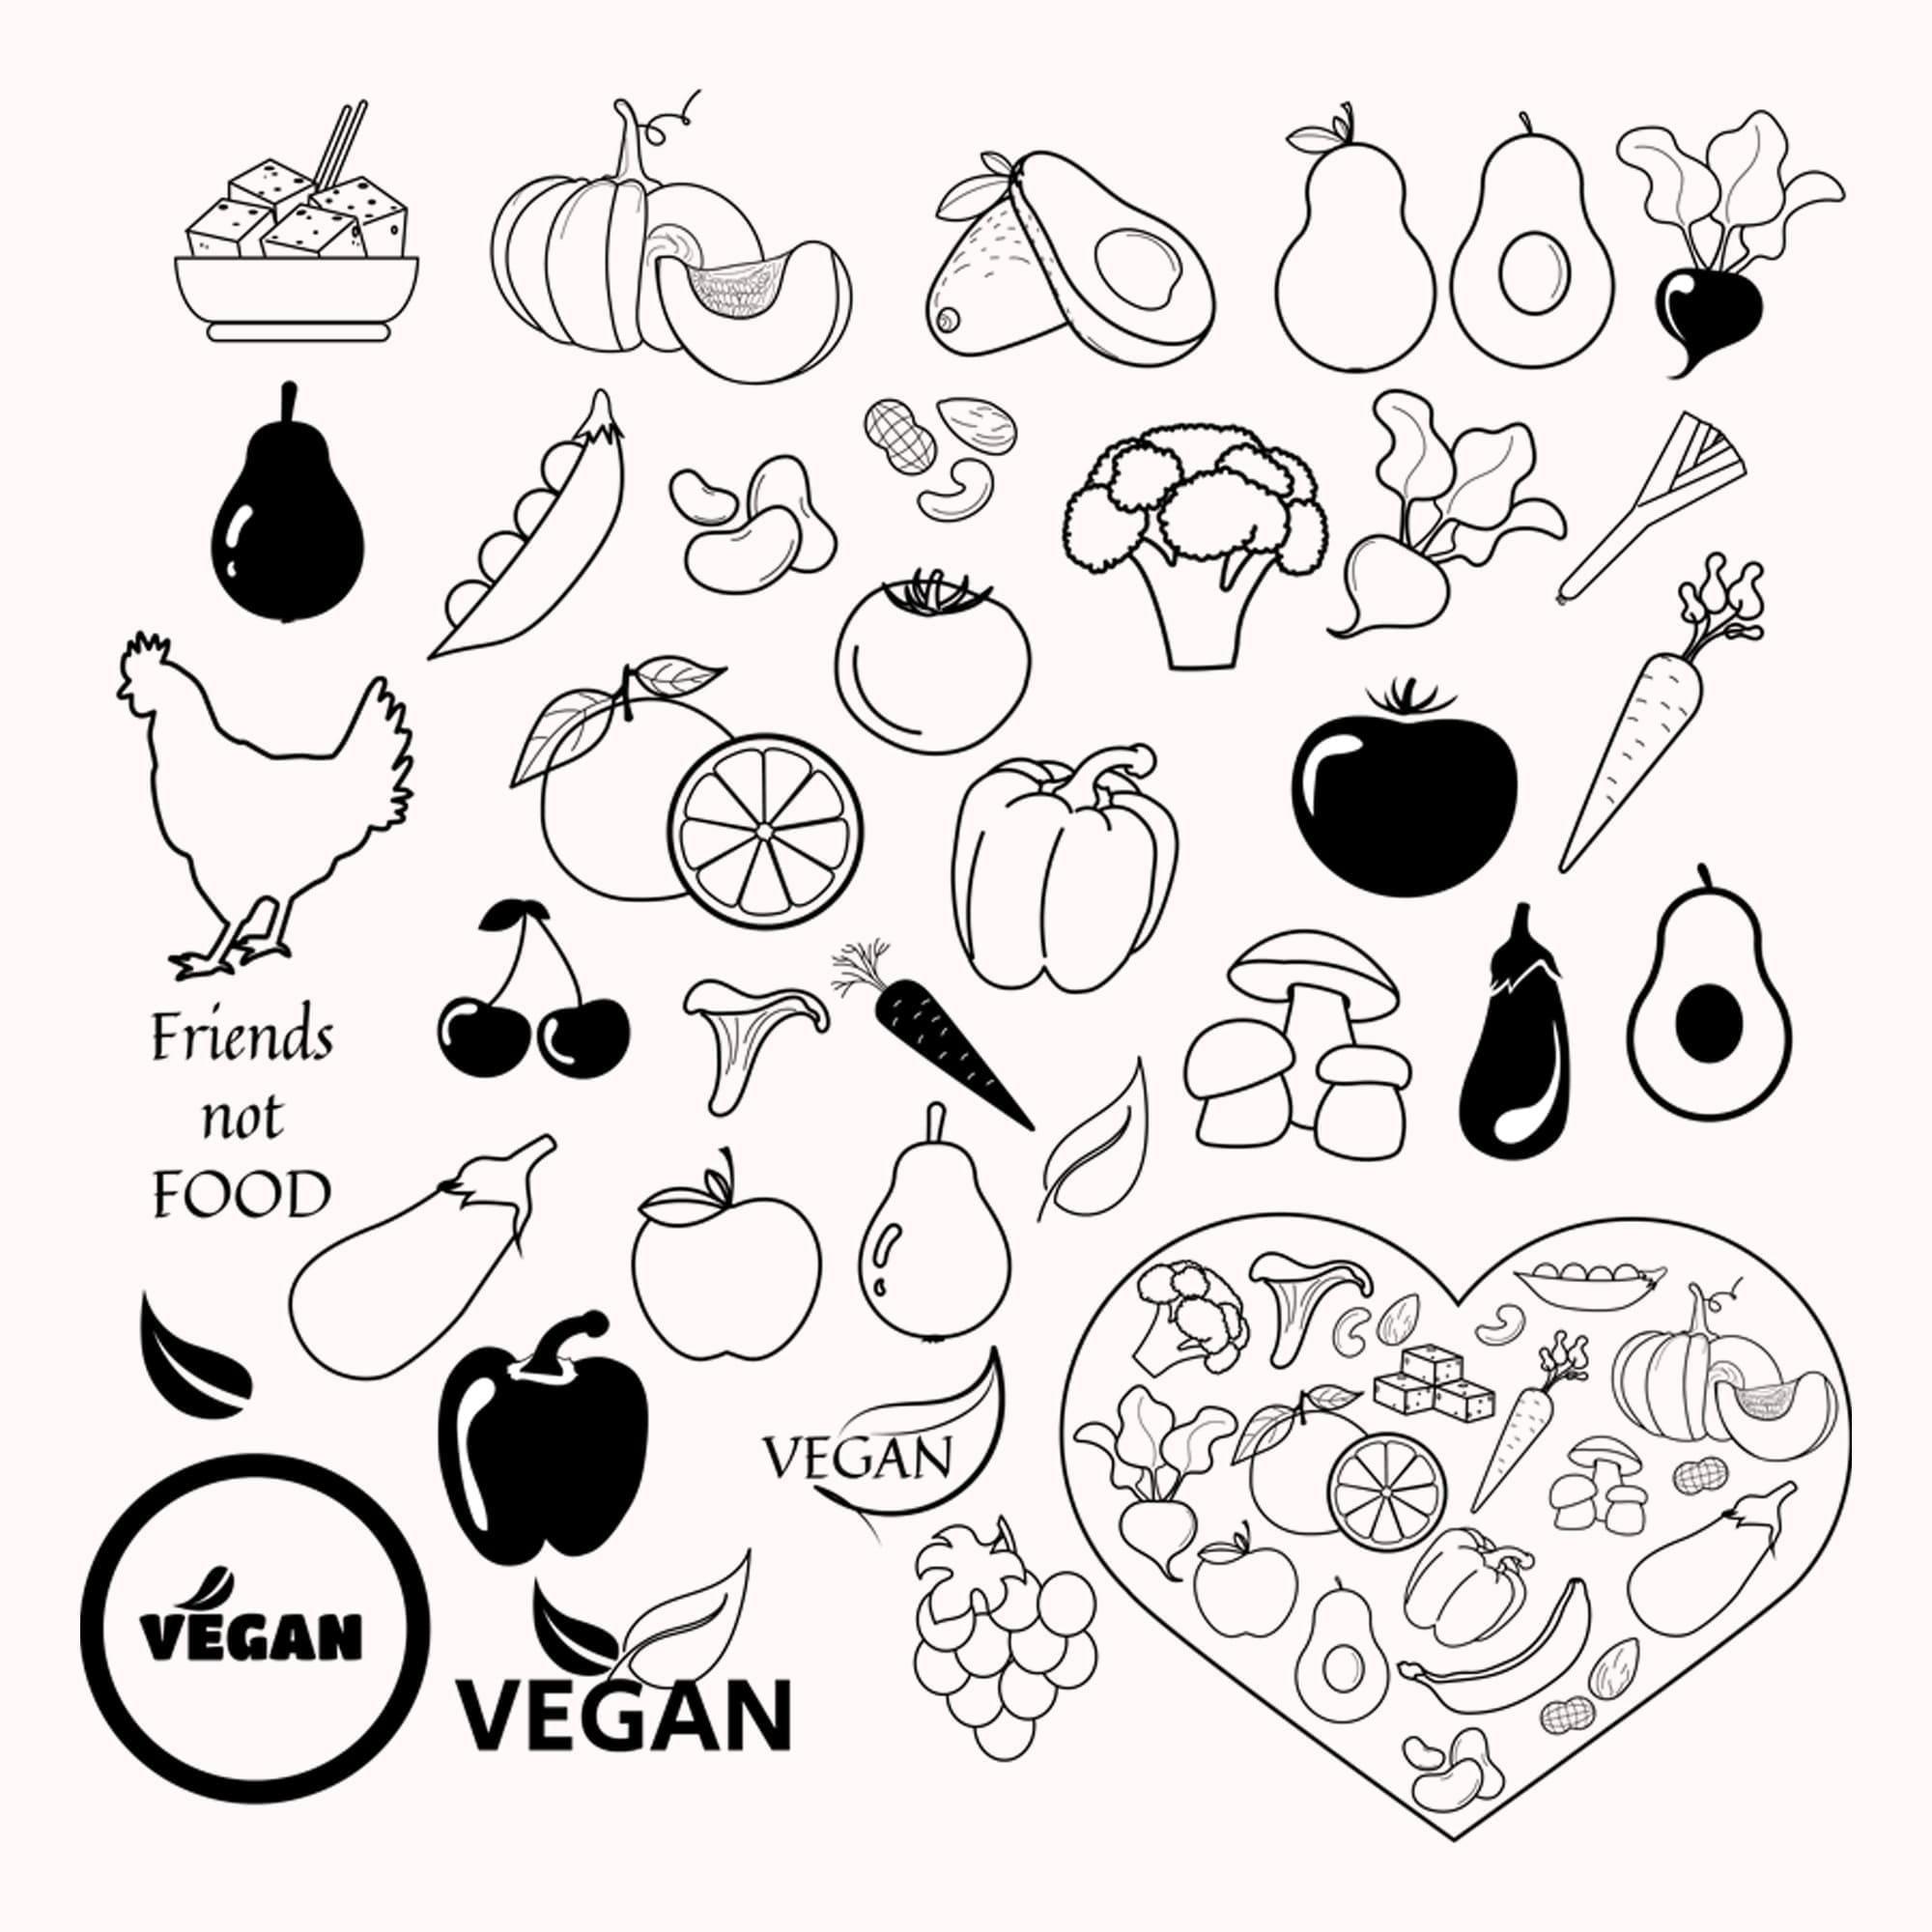 Fruits, vegetables and inscriptions about veganism are drawn on a white background.